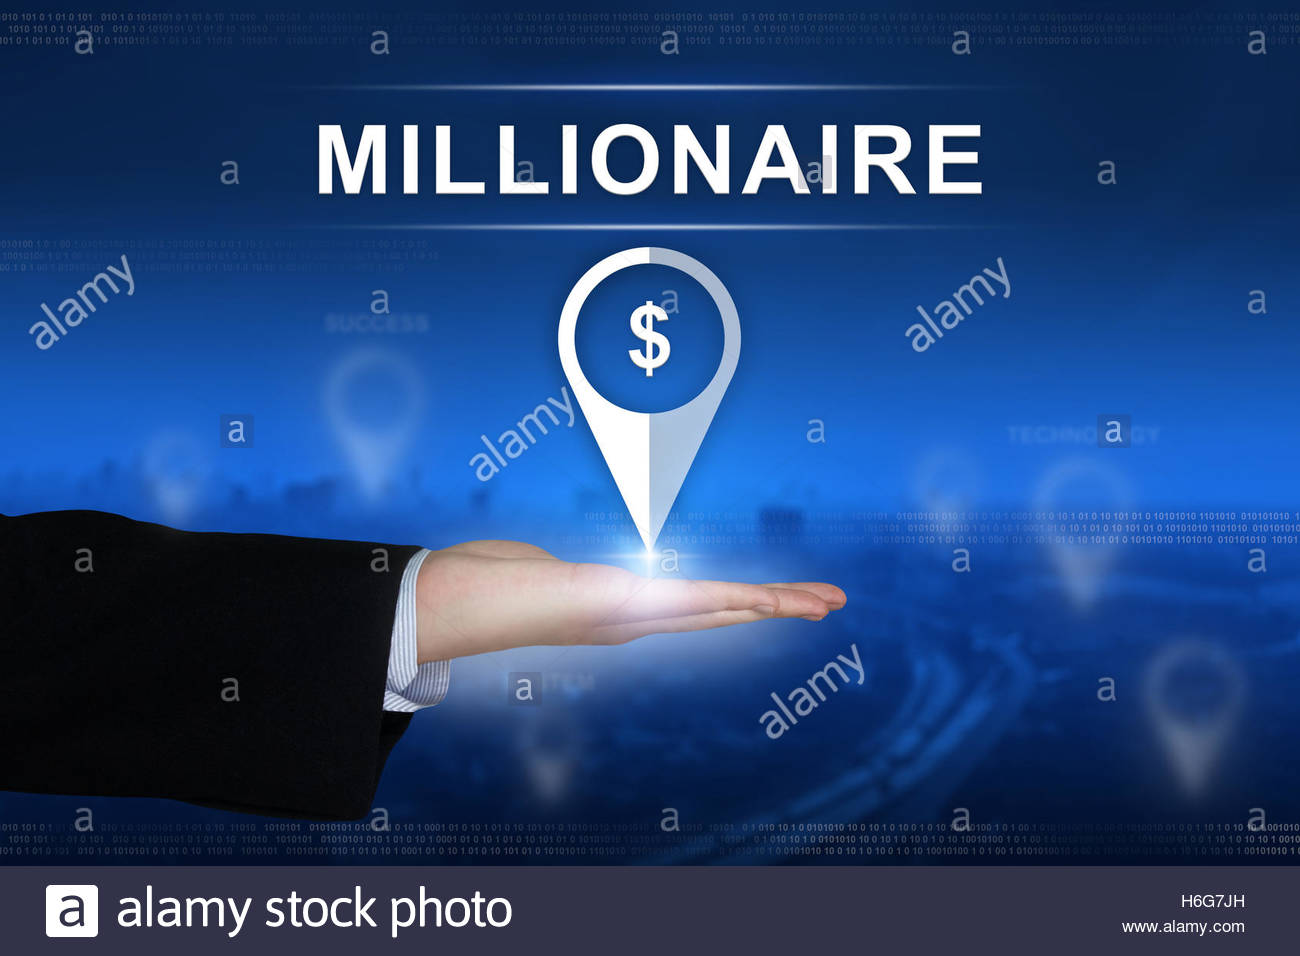 Millionaire Button With Business Hand On Blurred Background Stock